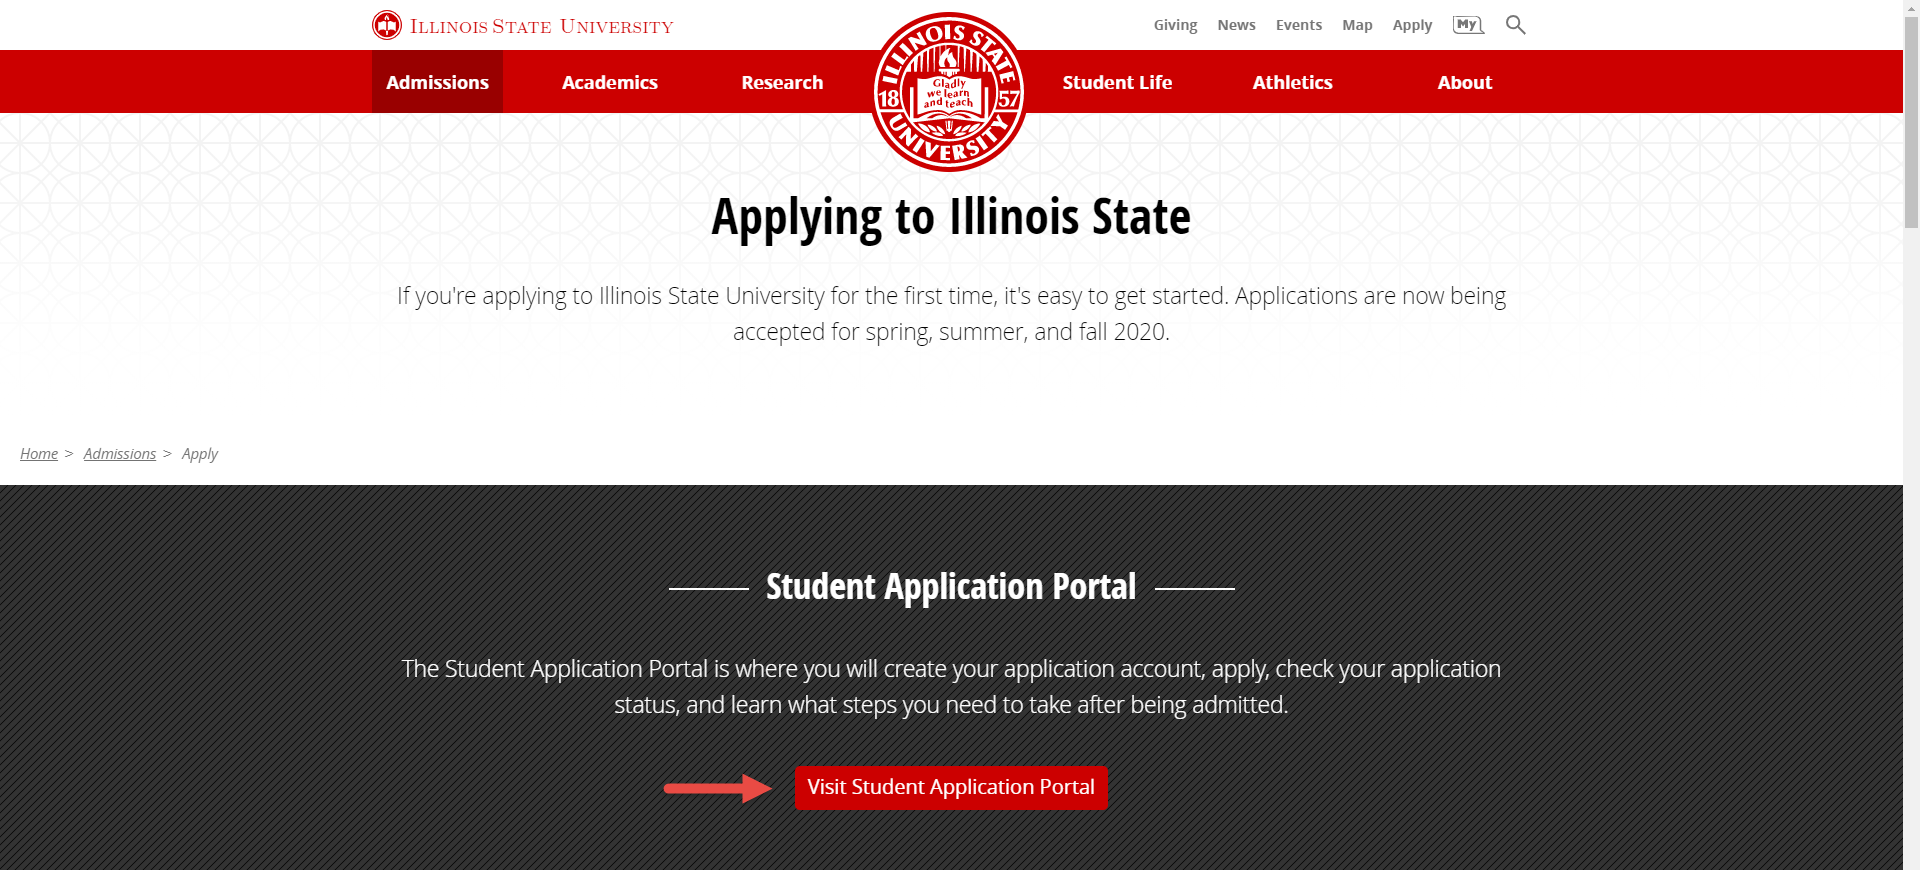 Screenshot depicting the Office of Admissions website, including the location of the Visit Student Application Portal button